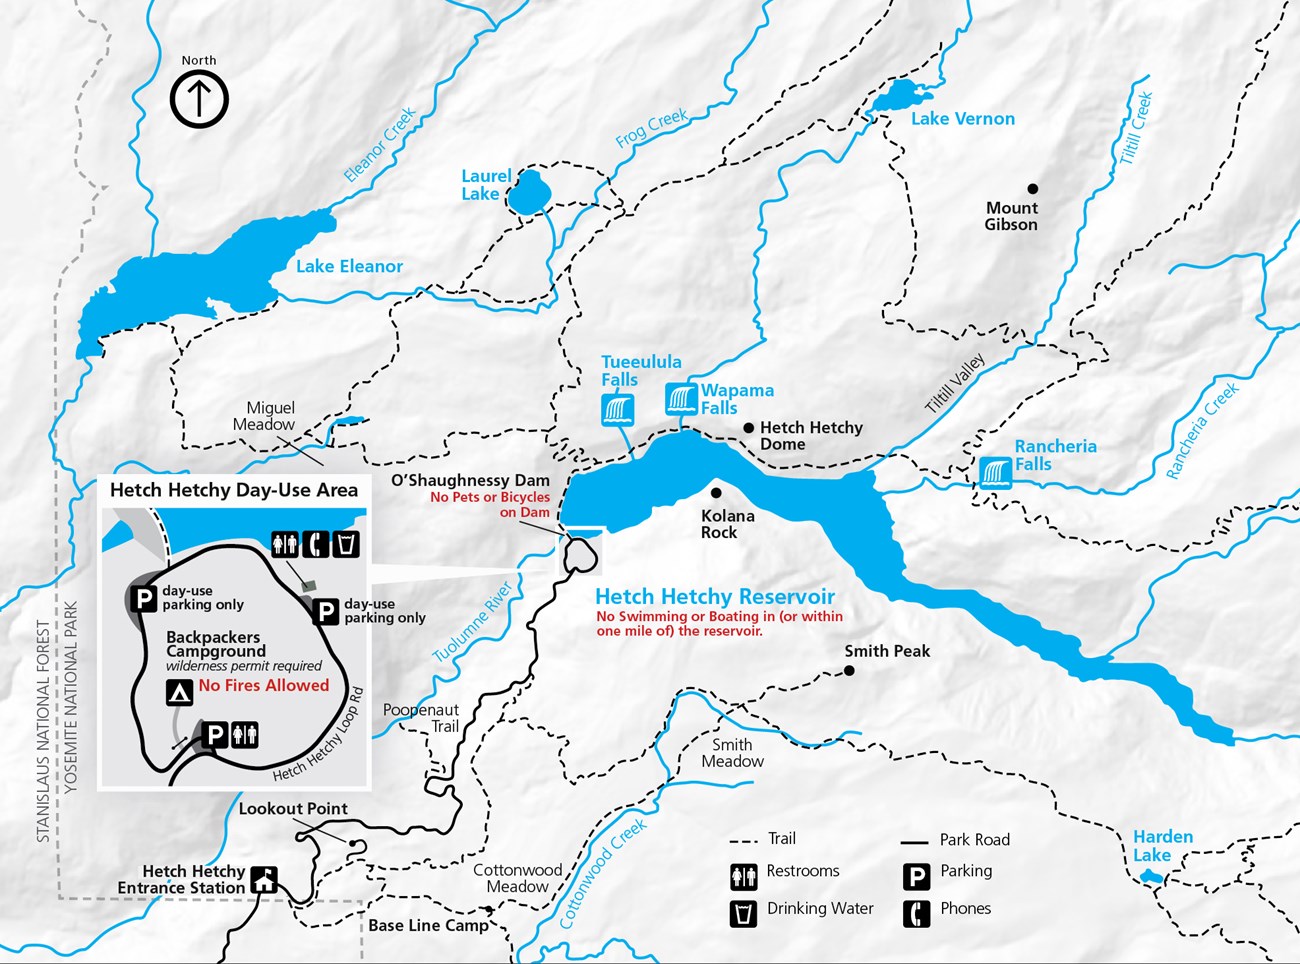 A map shows the Hetch Hetchy Reservoir and a number of hiking trails and waterfalls in the area.